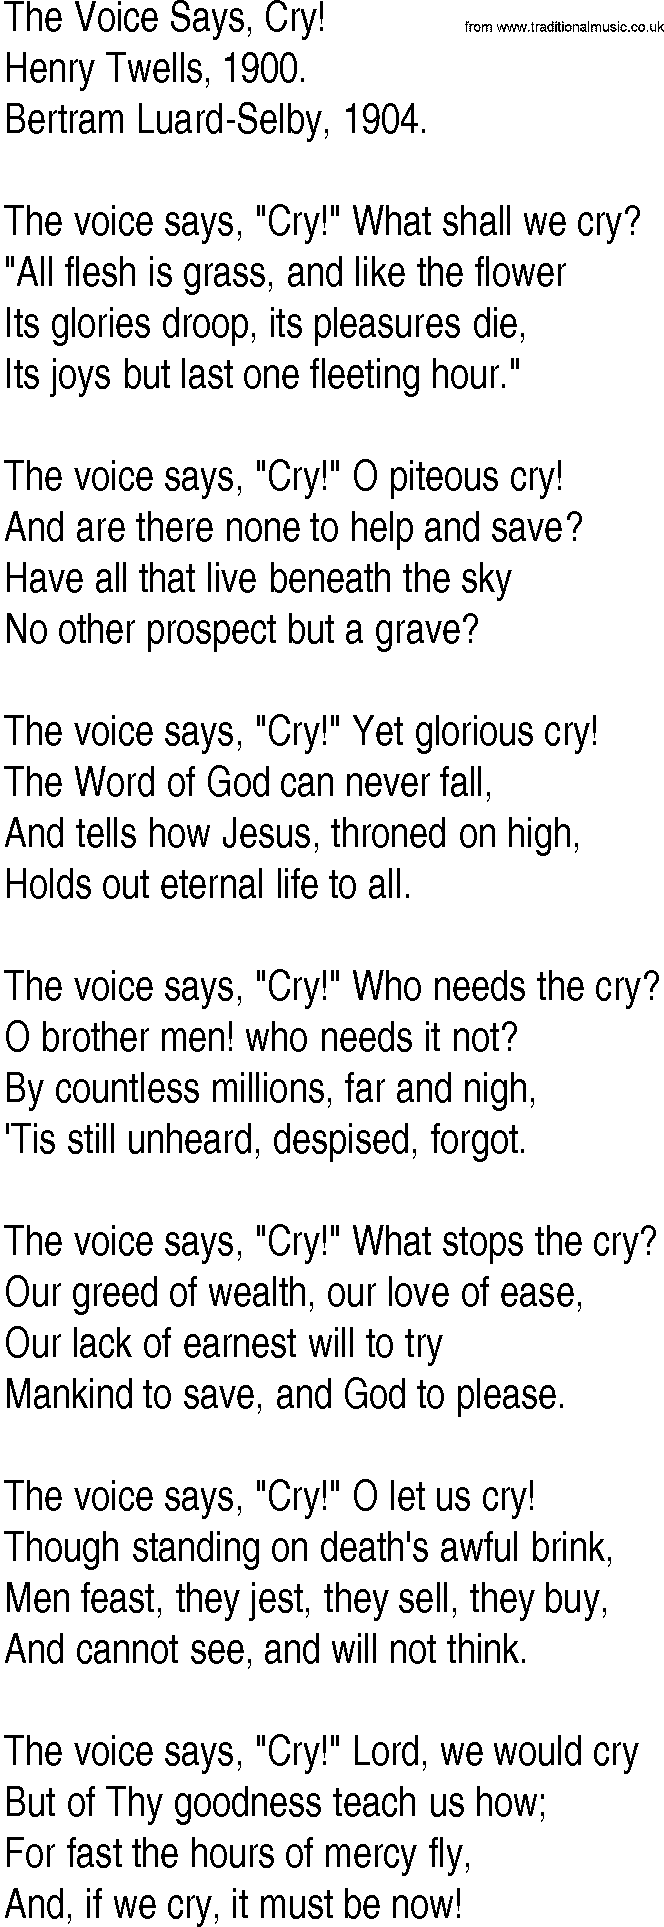 Hymn and Gospel Song: The Voice Says, Cry! by Henry Twells lyrics